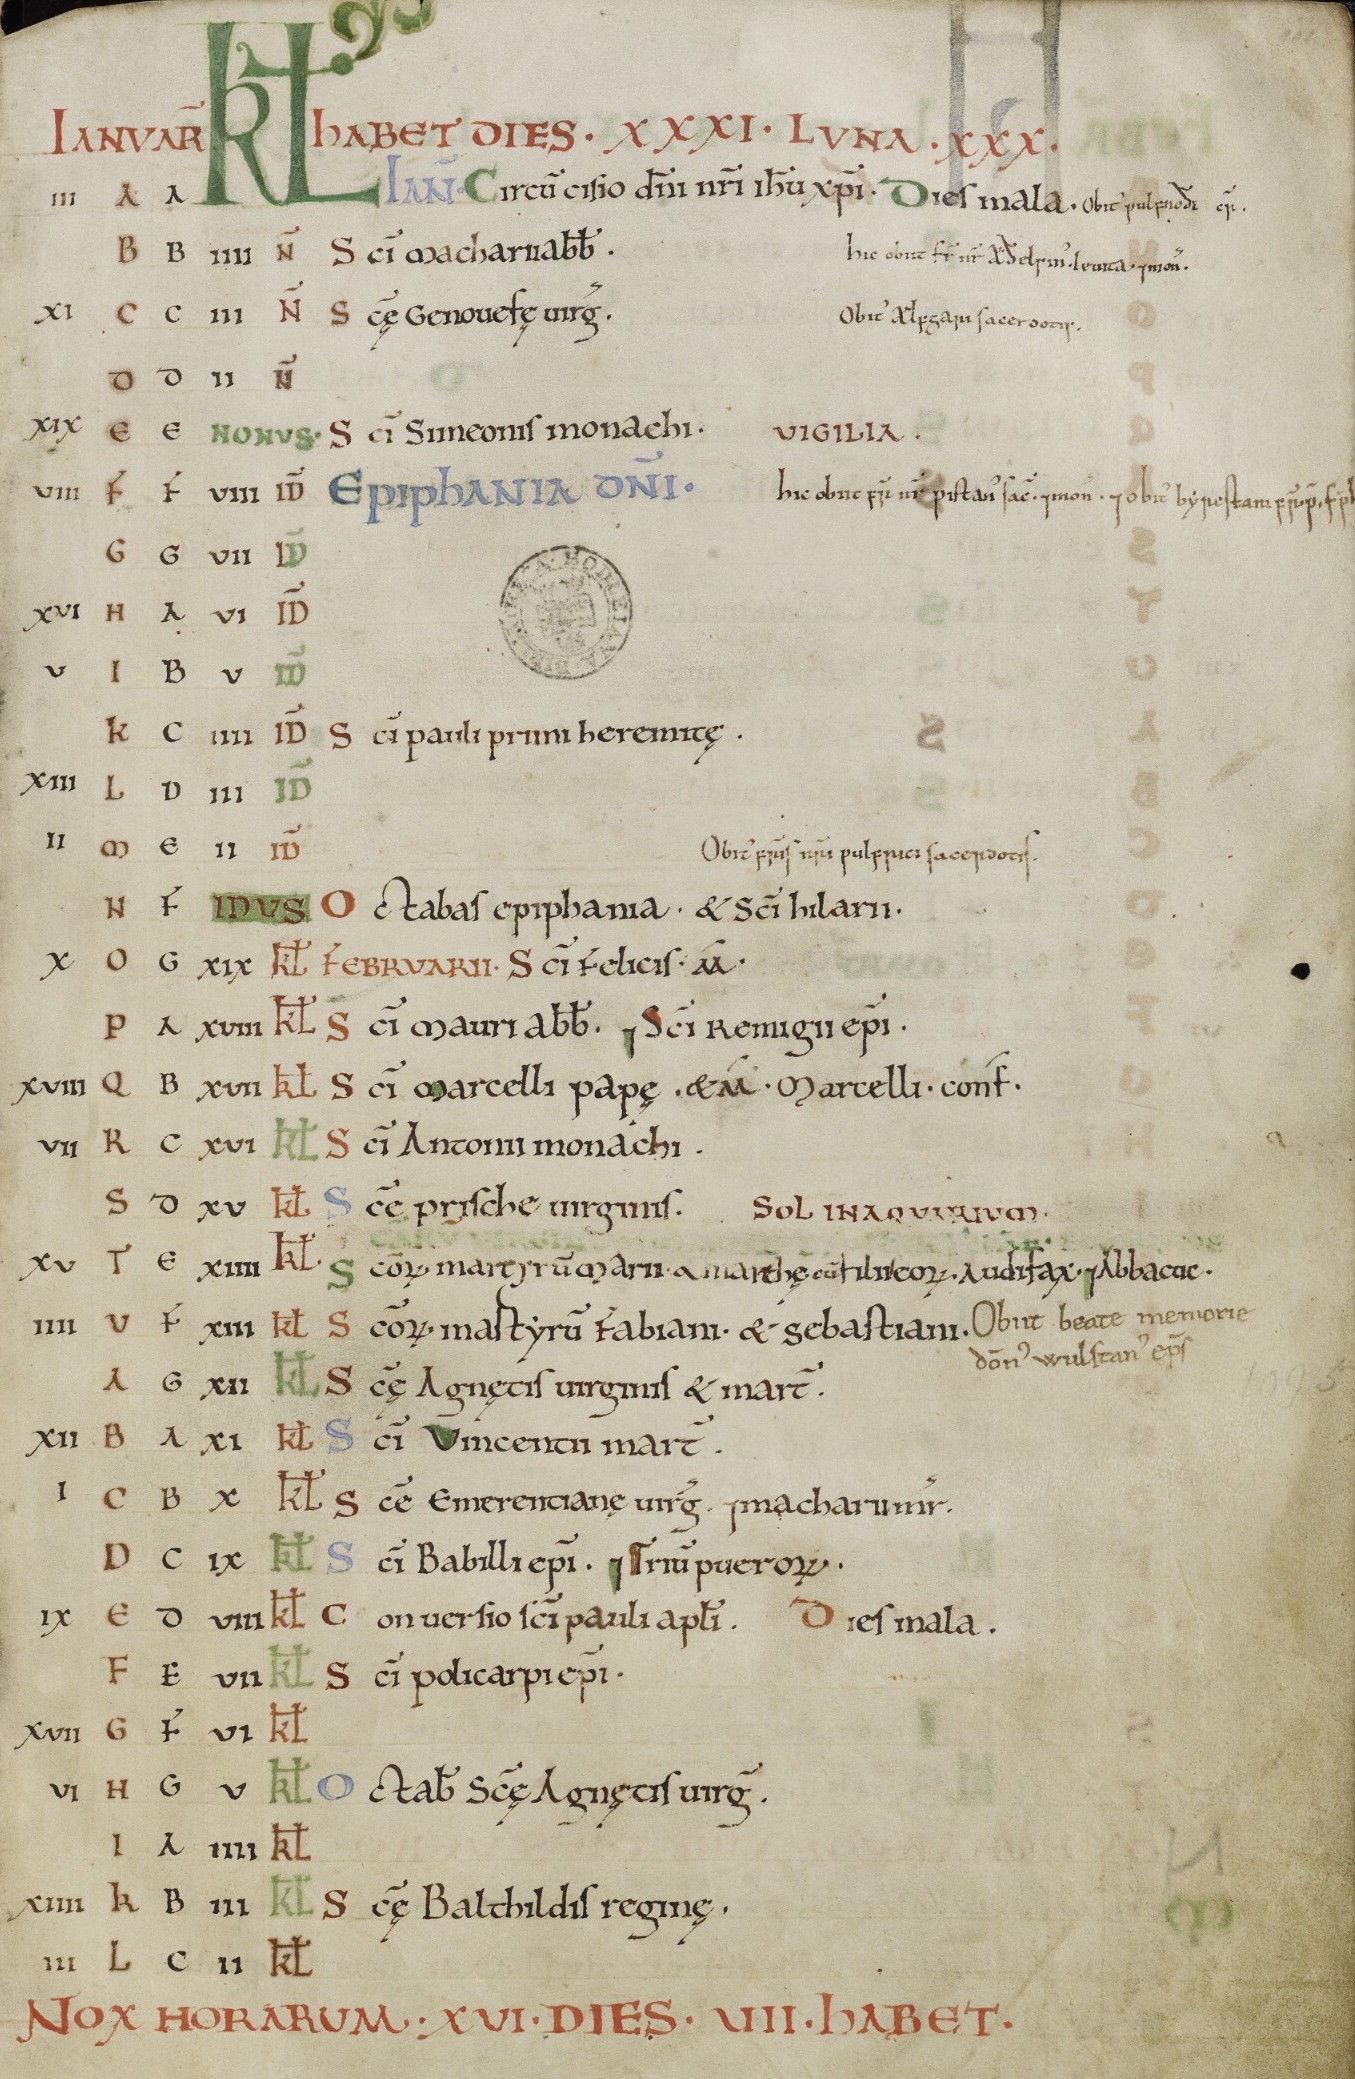 A manuscript folio display of the calendar for the month of January. Written in Latin, this calendar table lists the major Church feasts for each day of the month, indicating when there should be a vigil or if a particular feast is especially important. The scribe has inked text in red, green, blue, and black throughout.